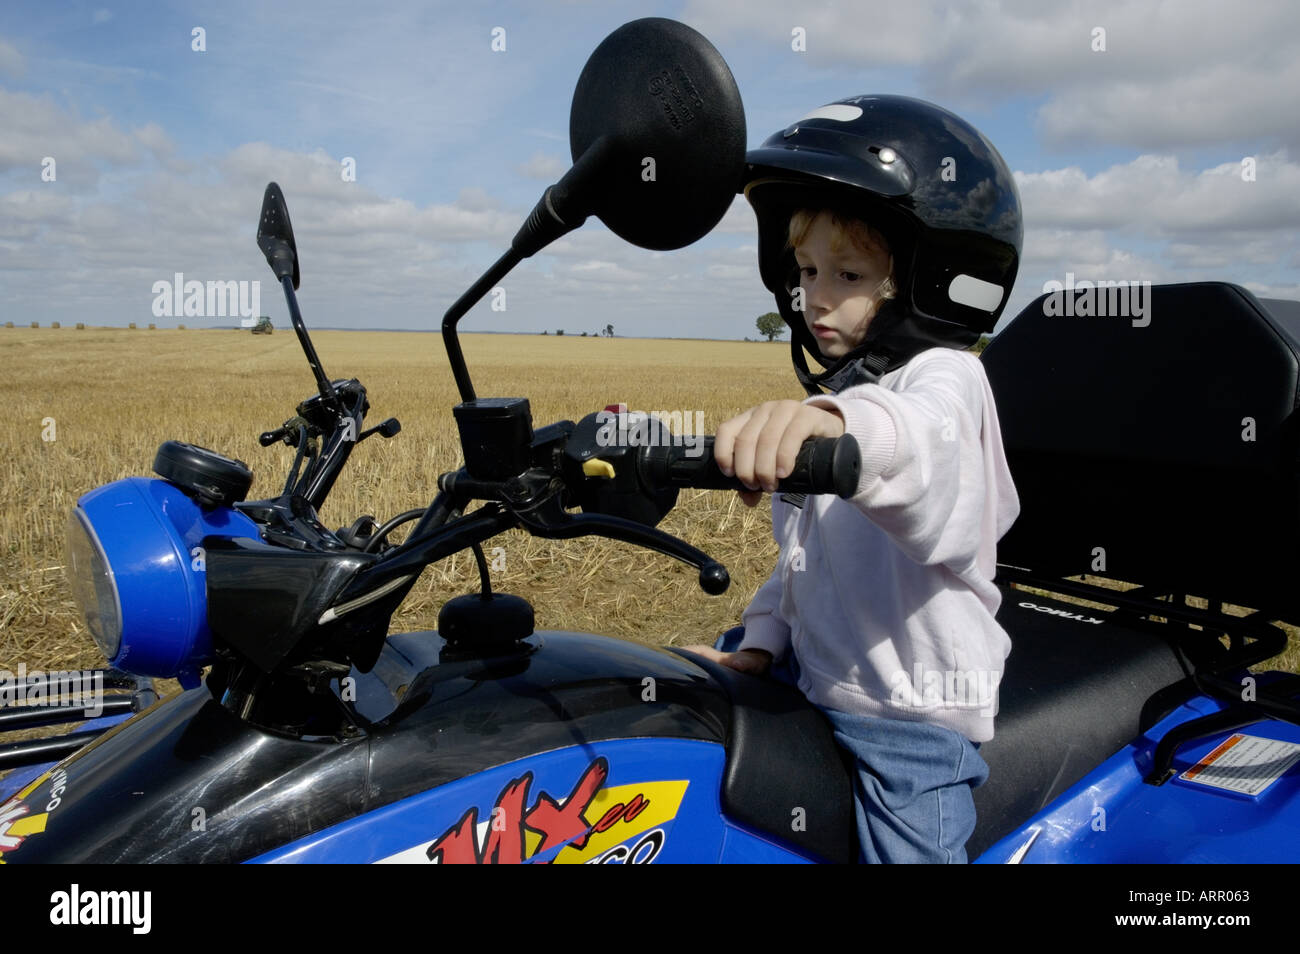 Four year old girl pretending to drive a quadbike, France. Stock Photo